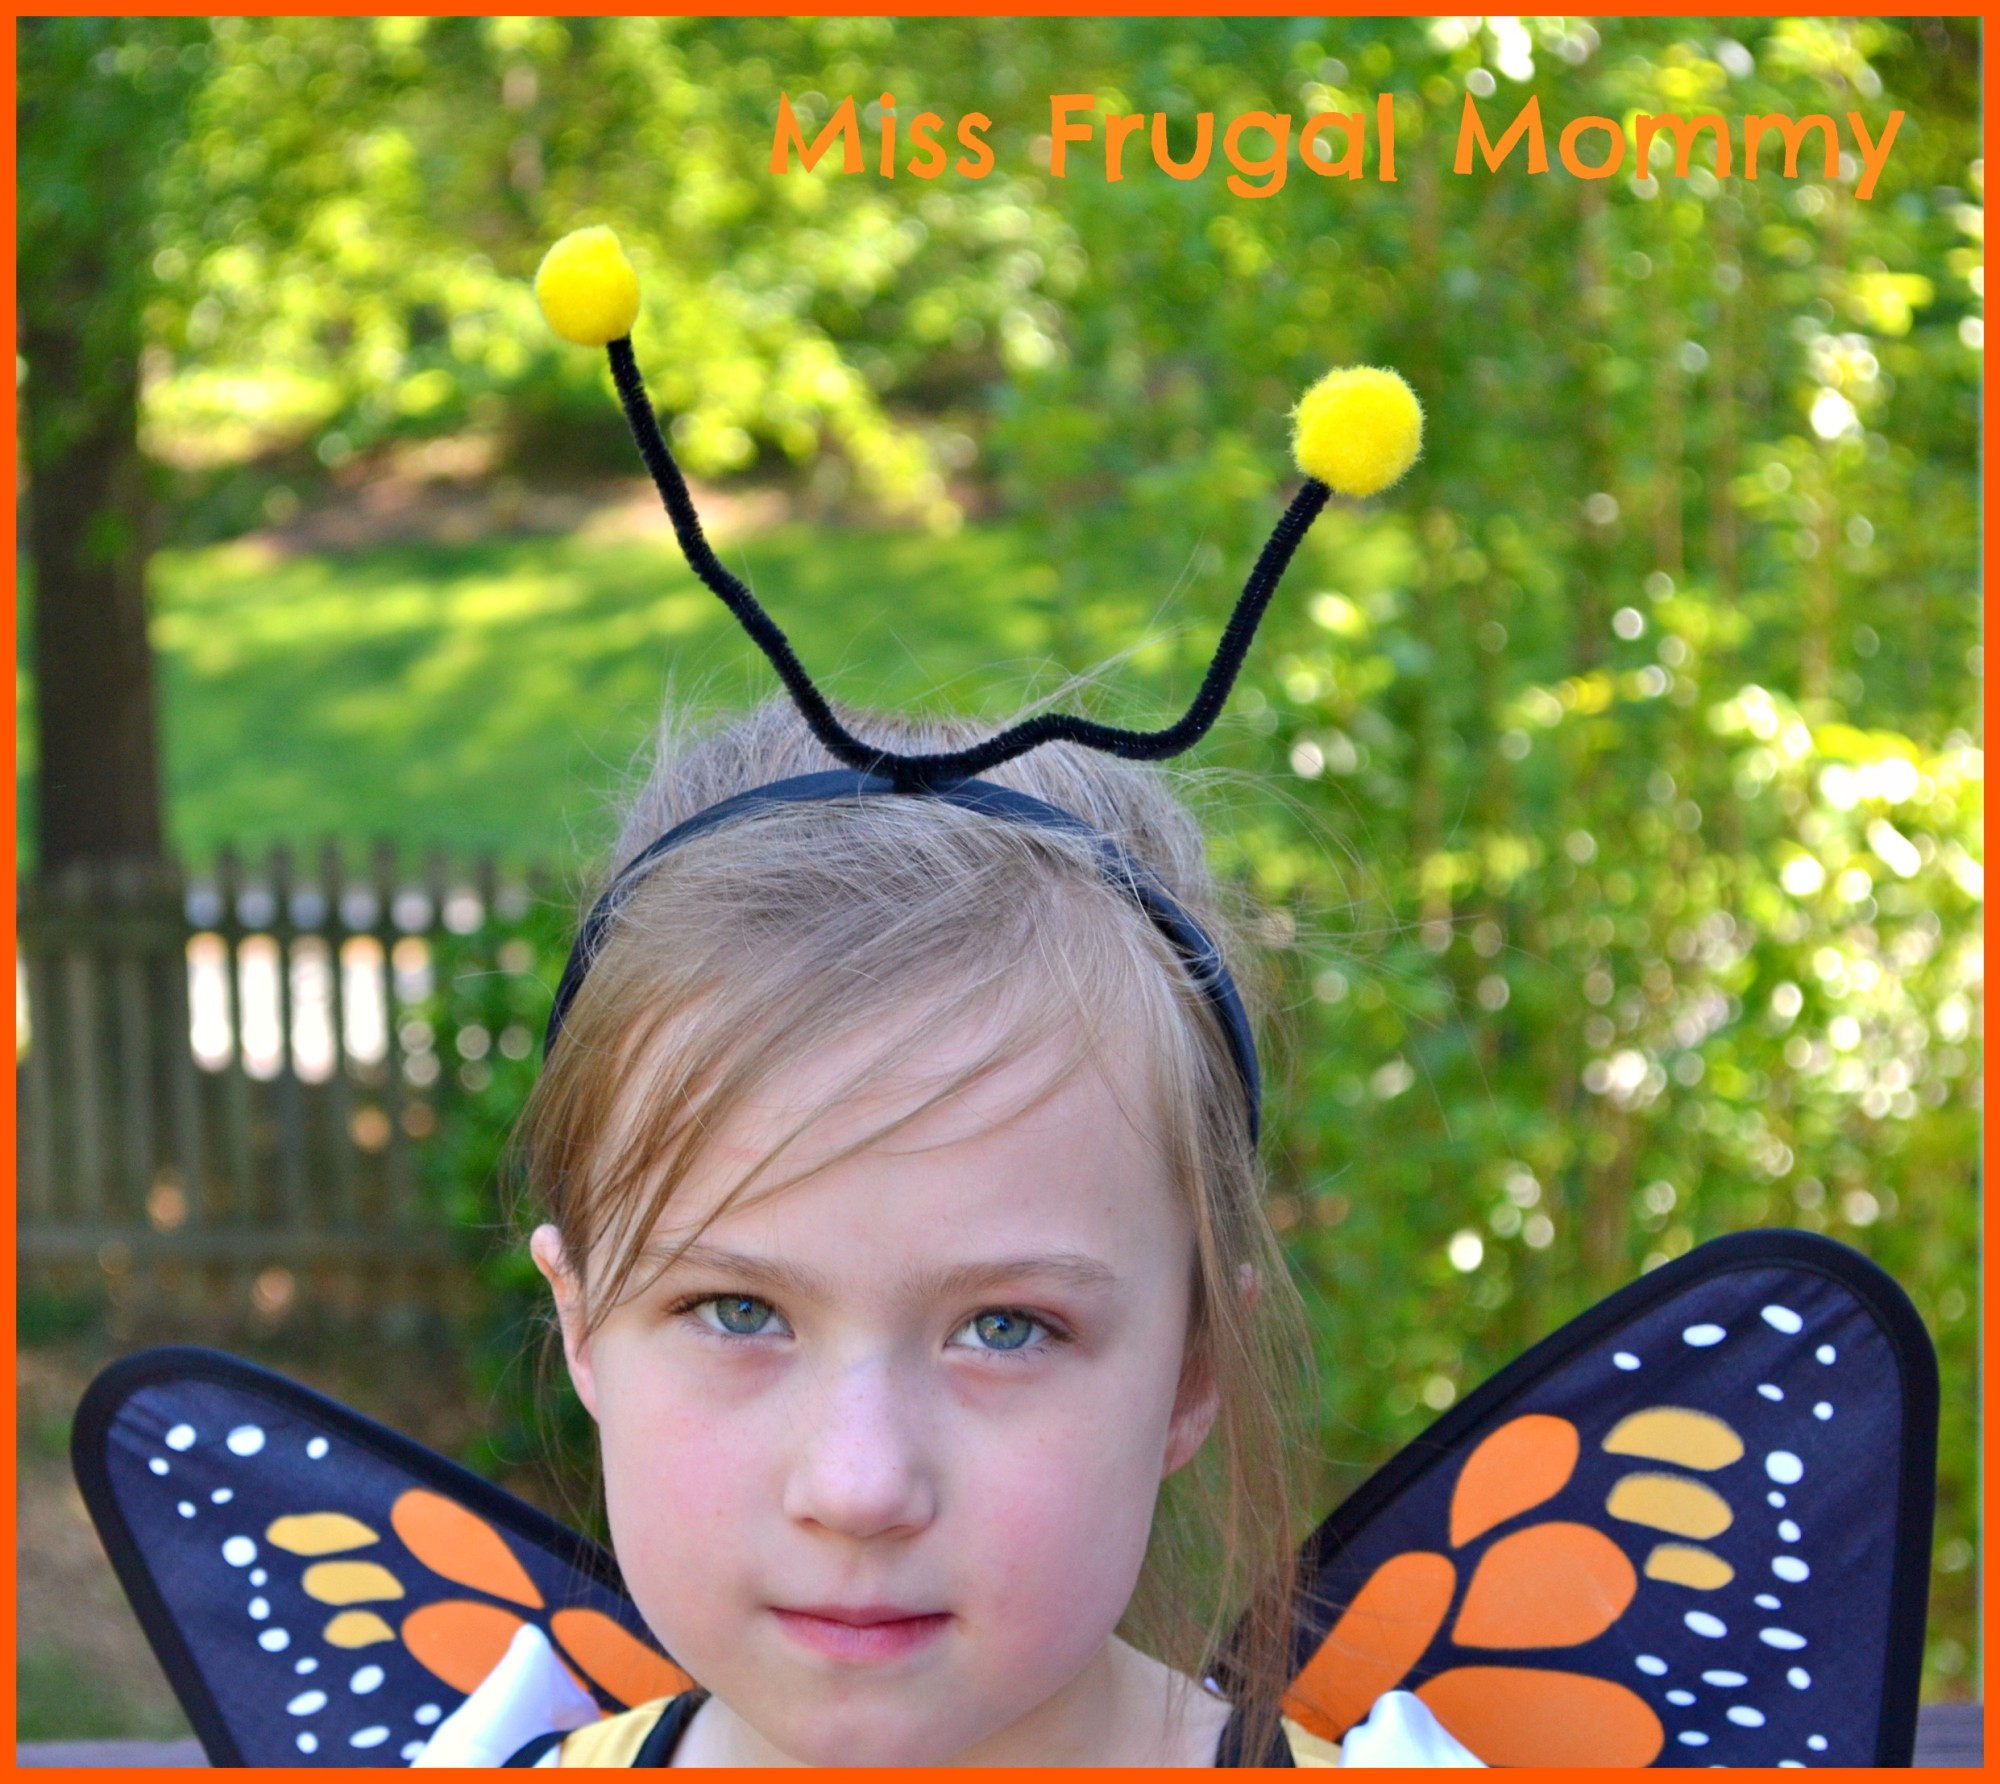 Costume Discounters: Butterfly Princess Costume Review